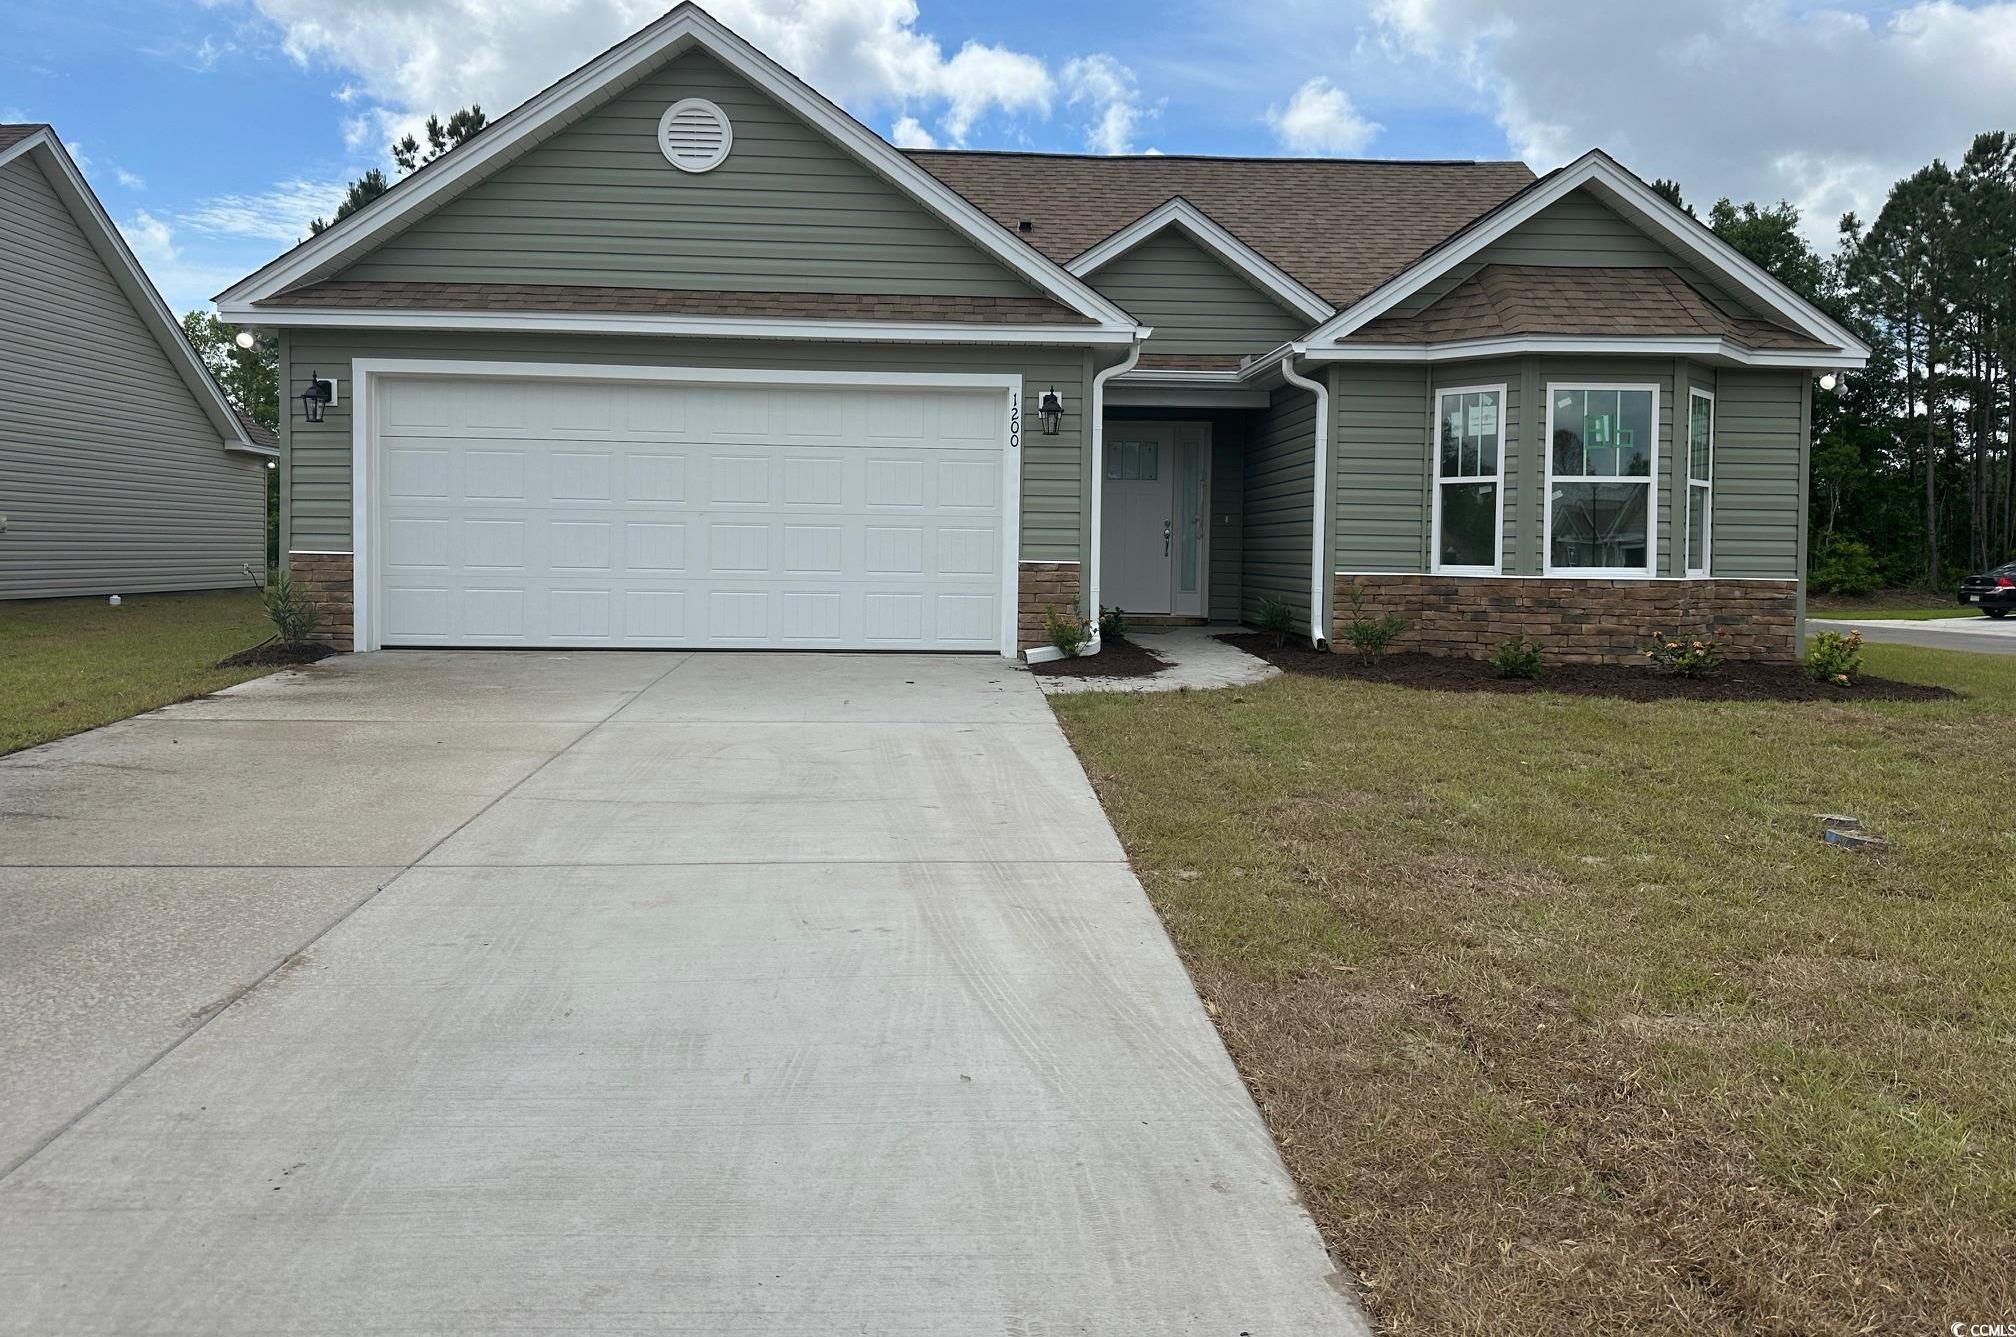 Photo one of 1200 Wehler Ct. Conway SC 29526 | MLS 2405717